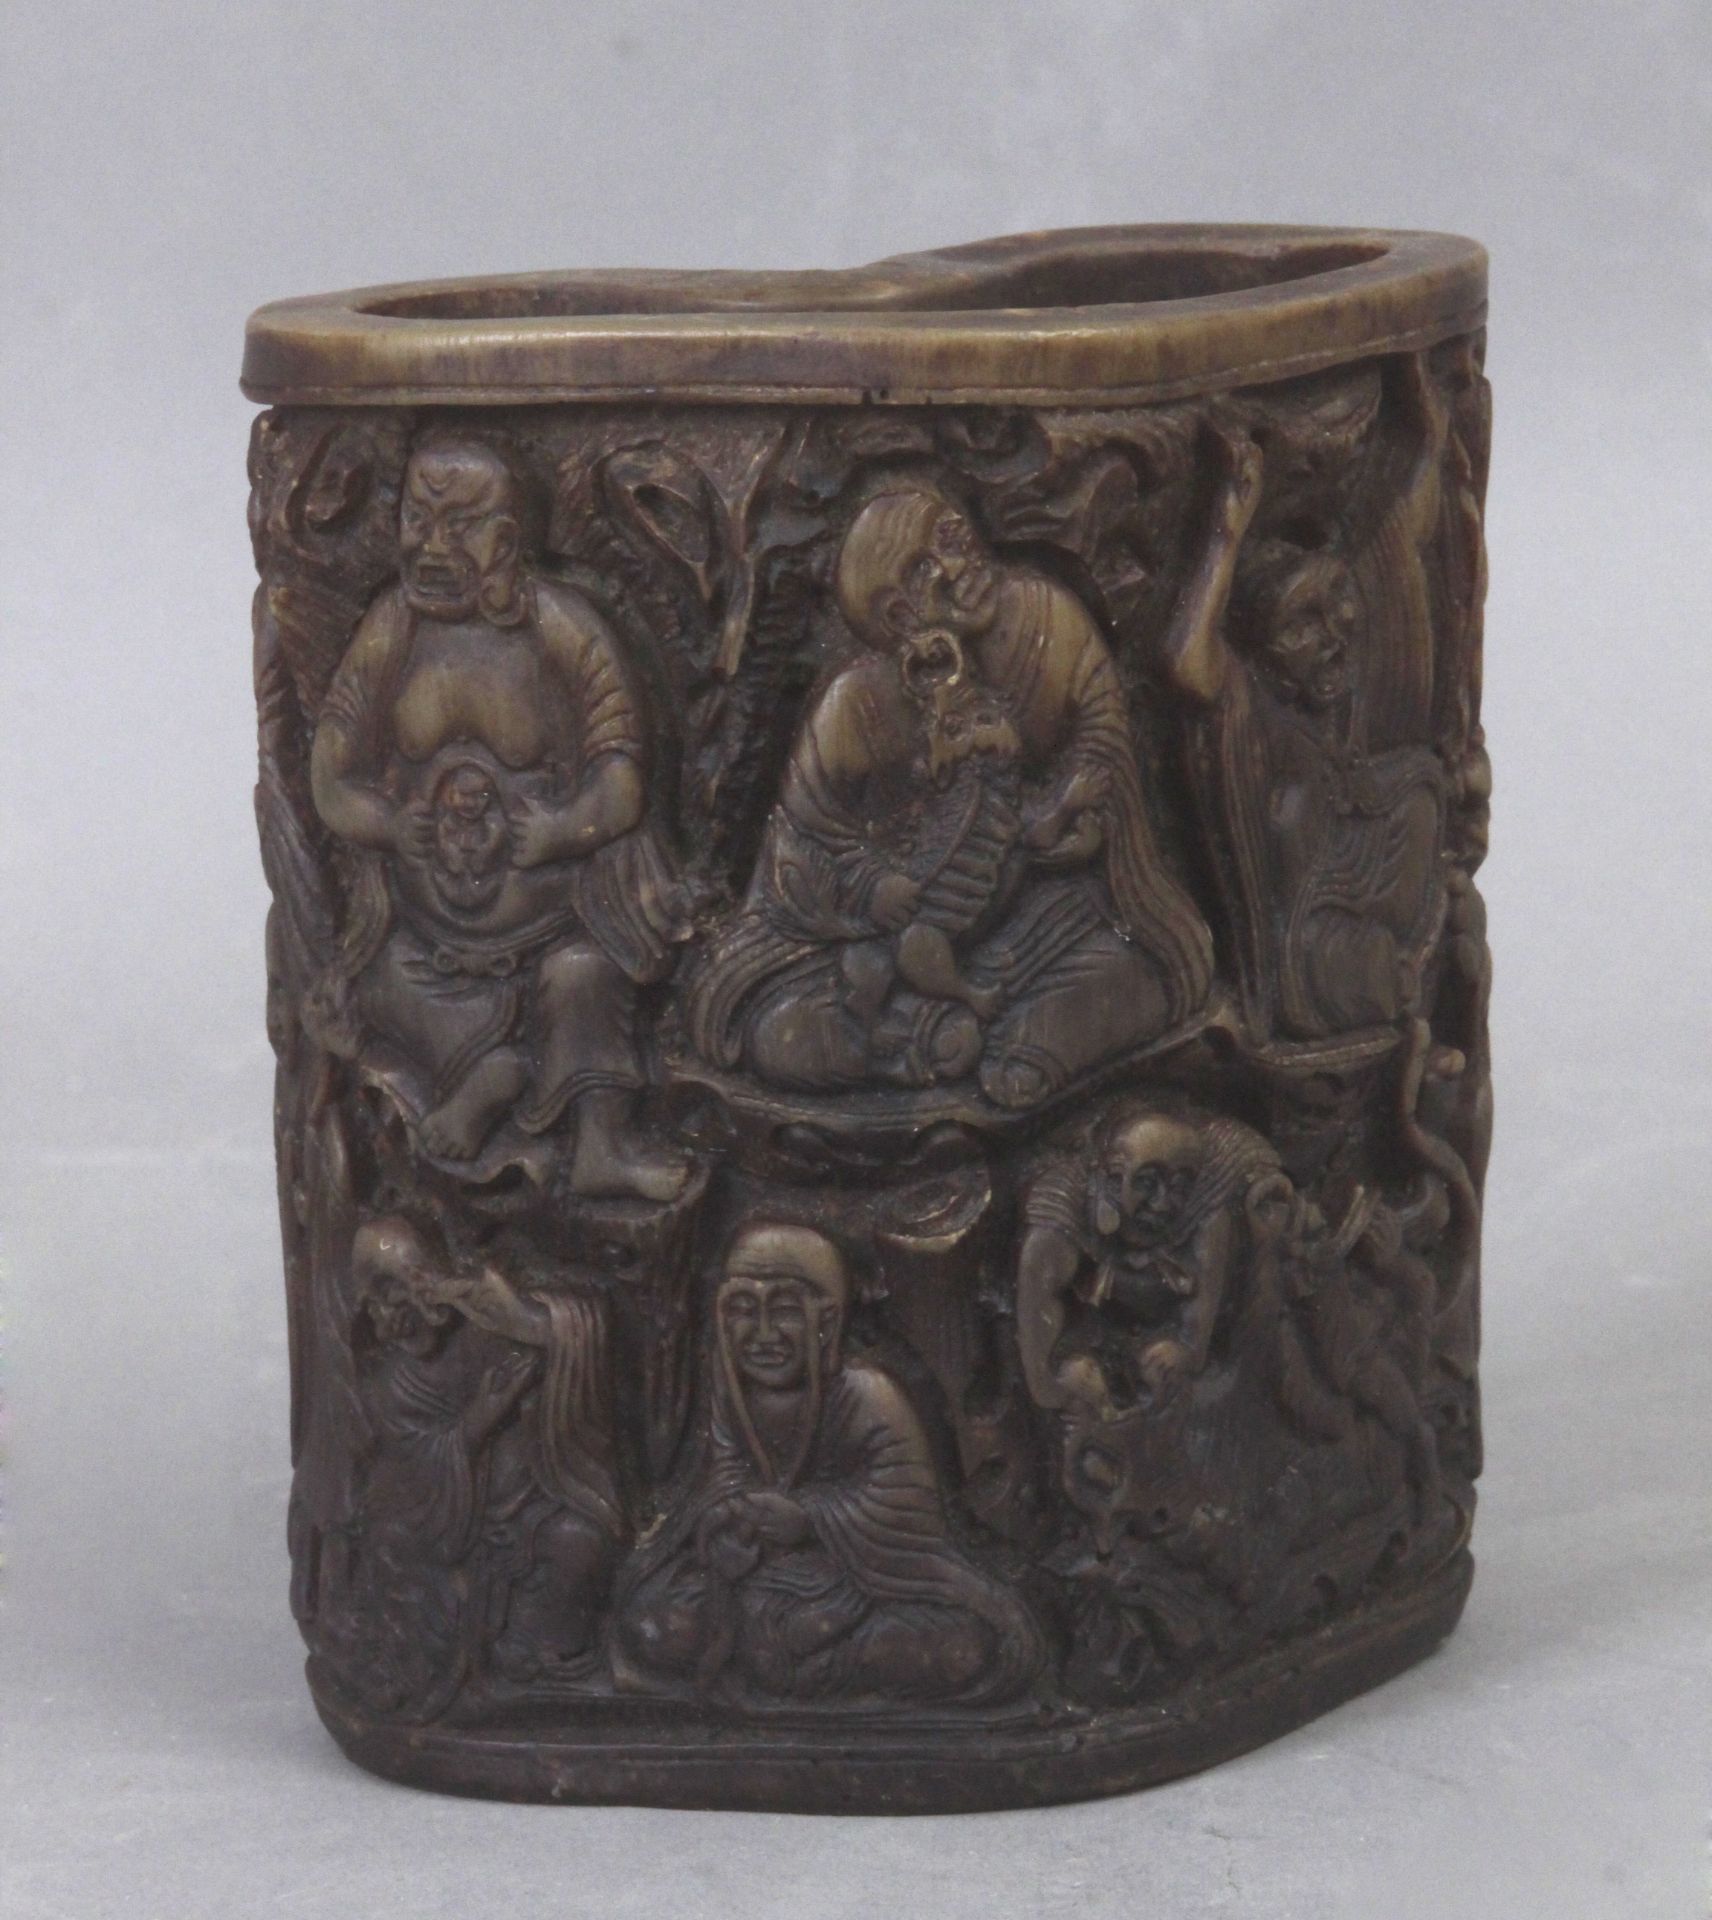 A carved rhino brush pot from Qing Dynasty